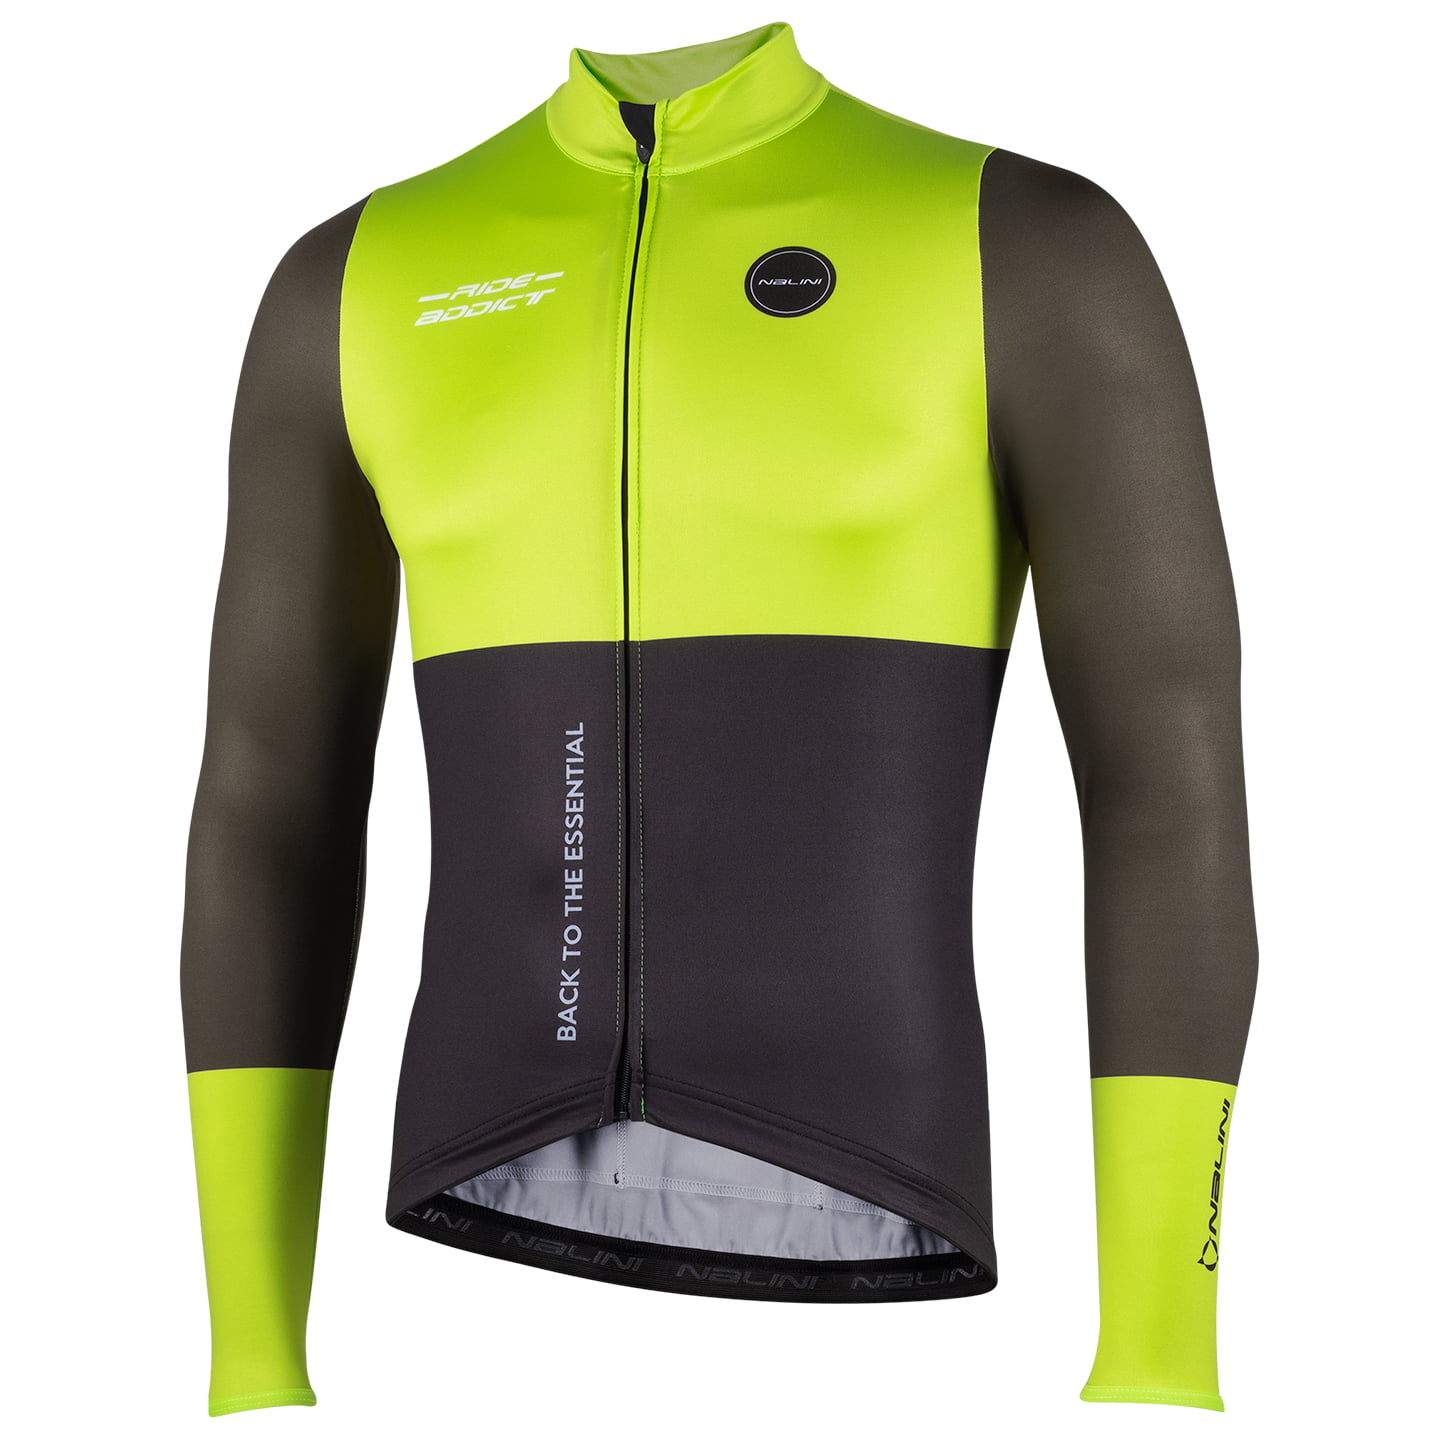 NALINI long sleeve jersey Warm Fit Long Sleeve Jersey, for men, size M, Cycling jersey, Cycling clothing